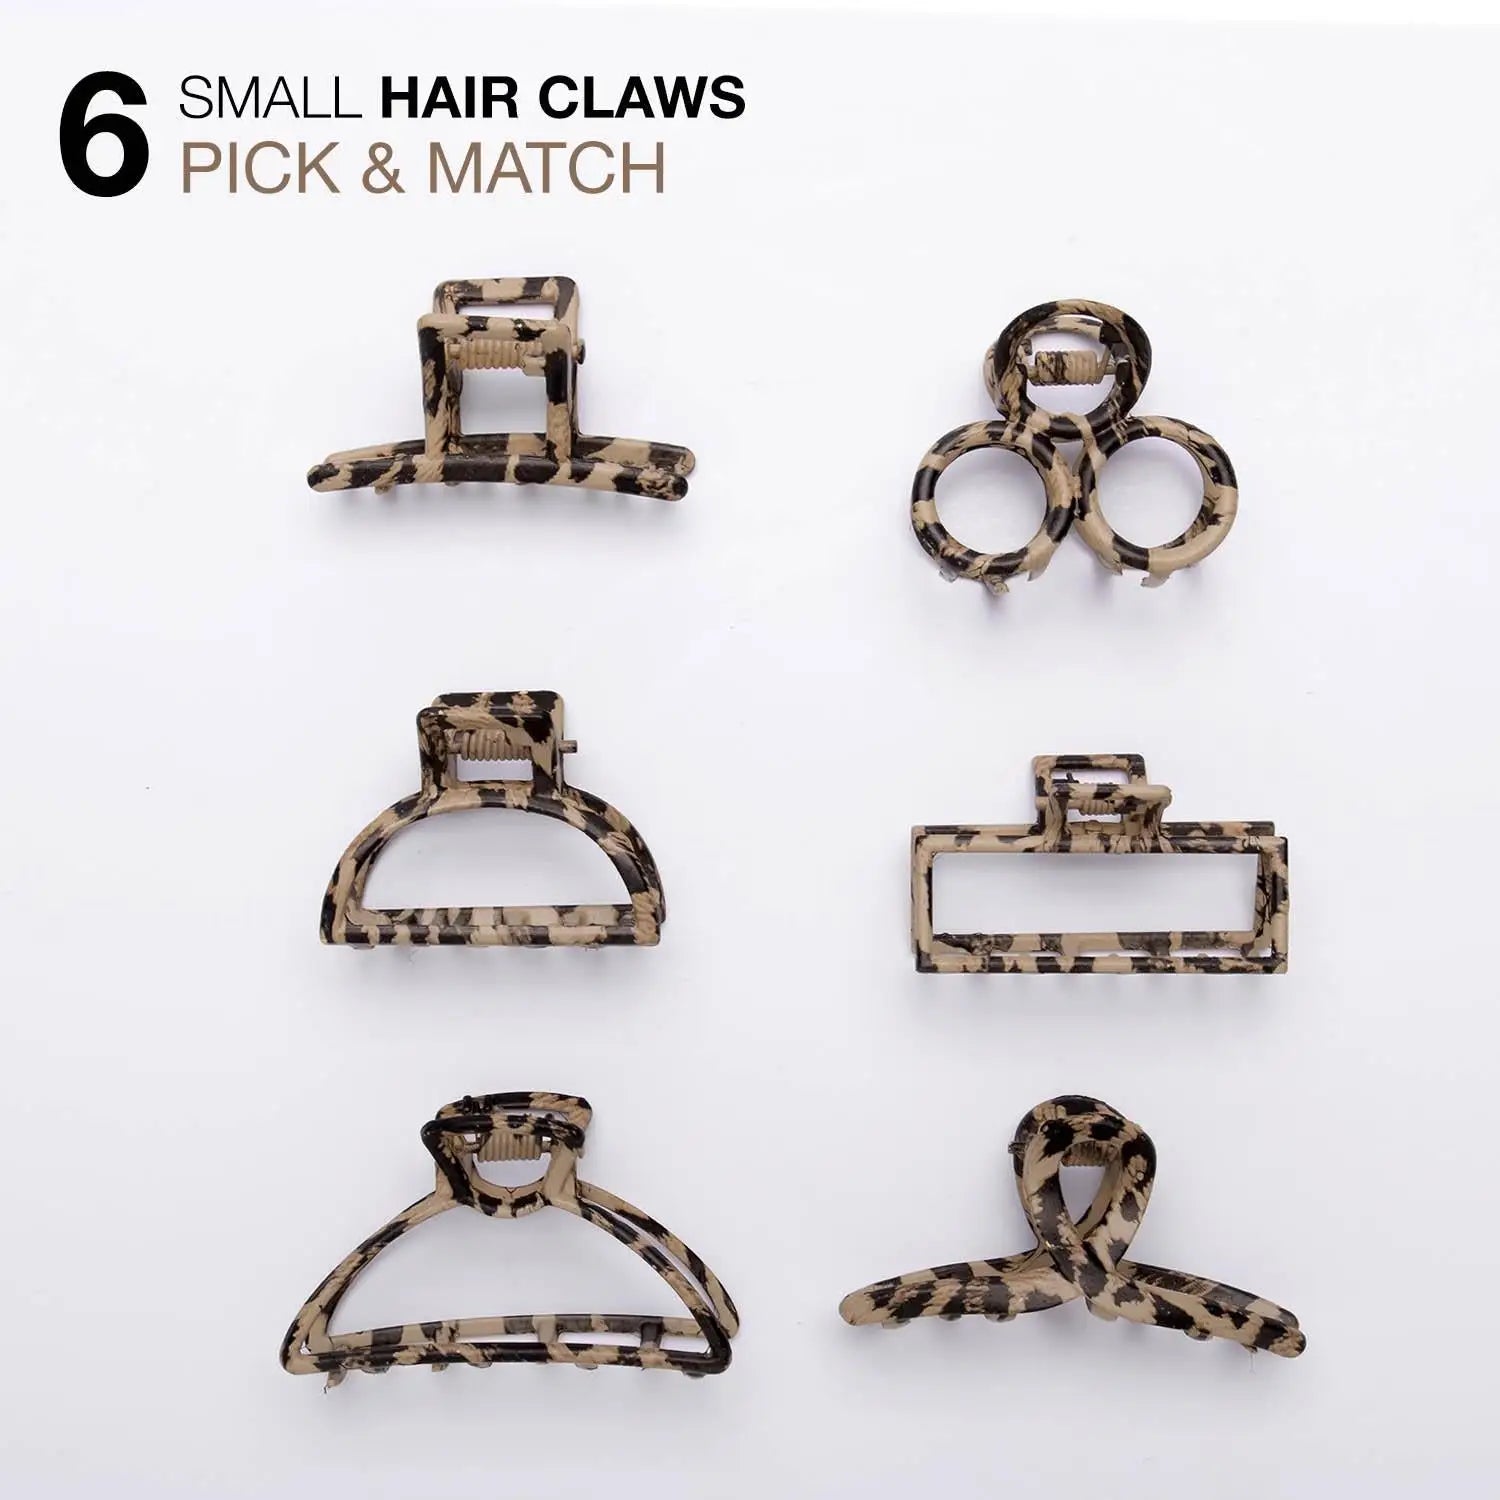 Leopard print hair claw set with various sizes on white surface